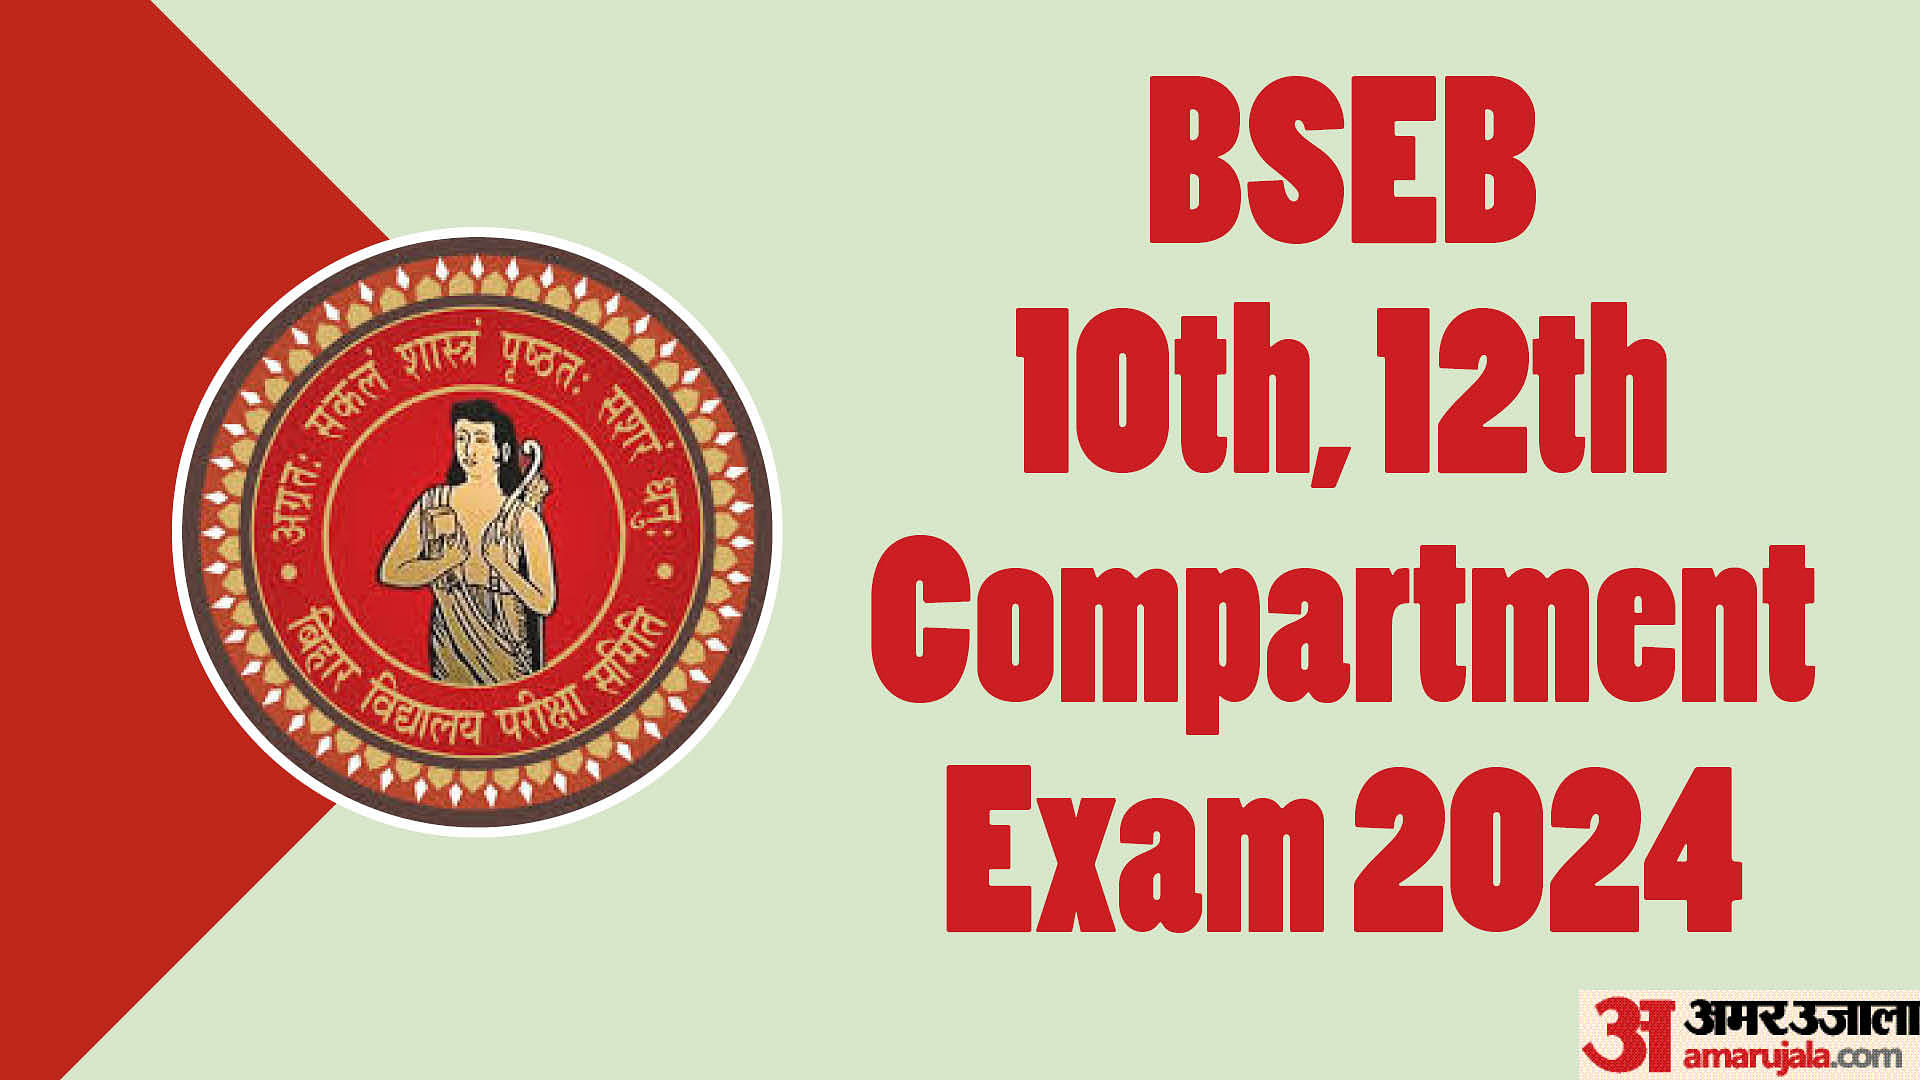 BSEB 10th, 12th compartment scrutiny 2024 registration window open